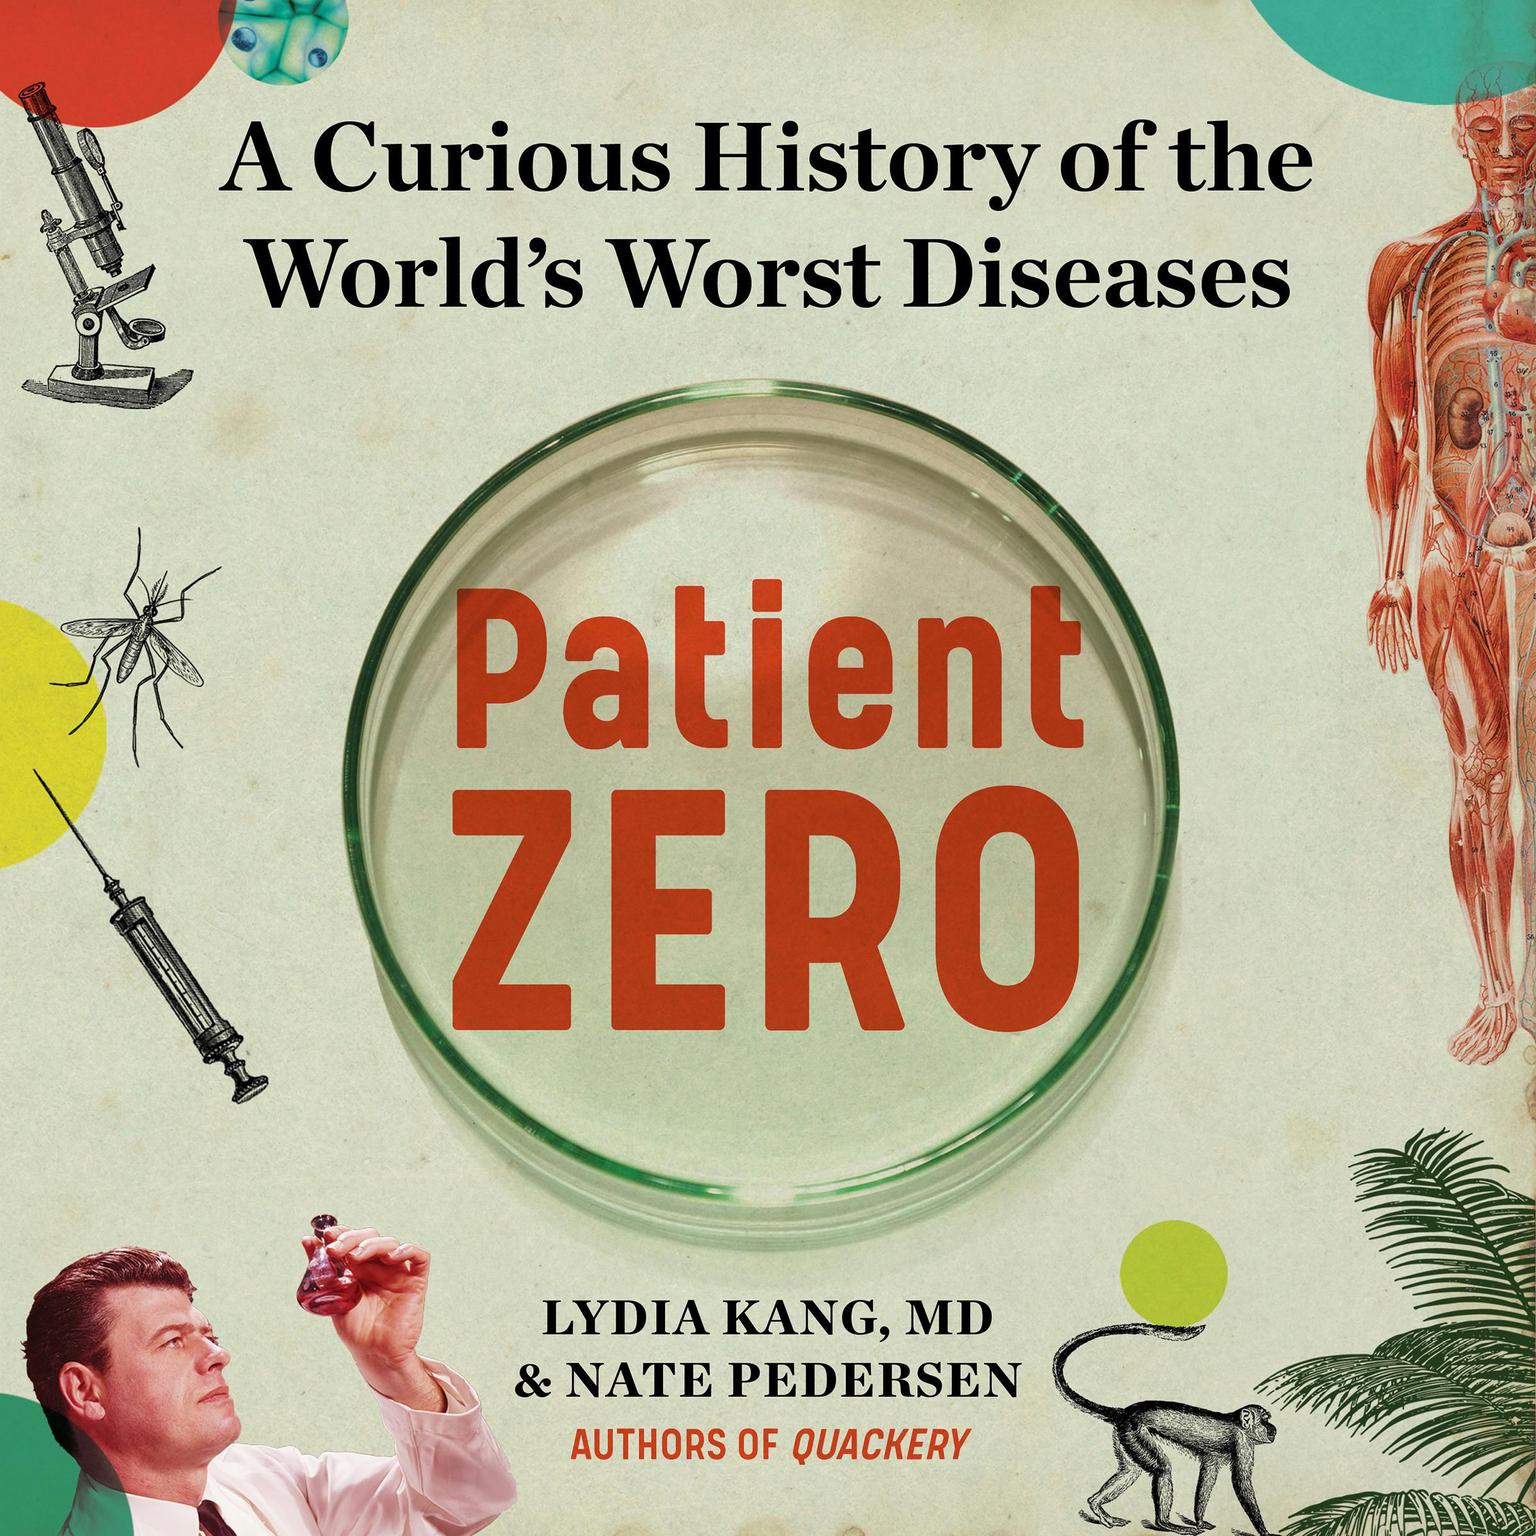 Patient Zero: A Curious History of the Worlds Worst Diseases Audiobook, by Lydia Kang